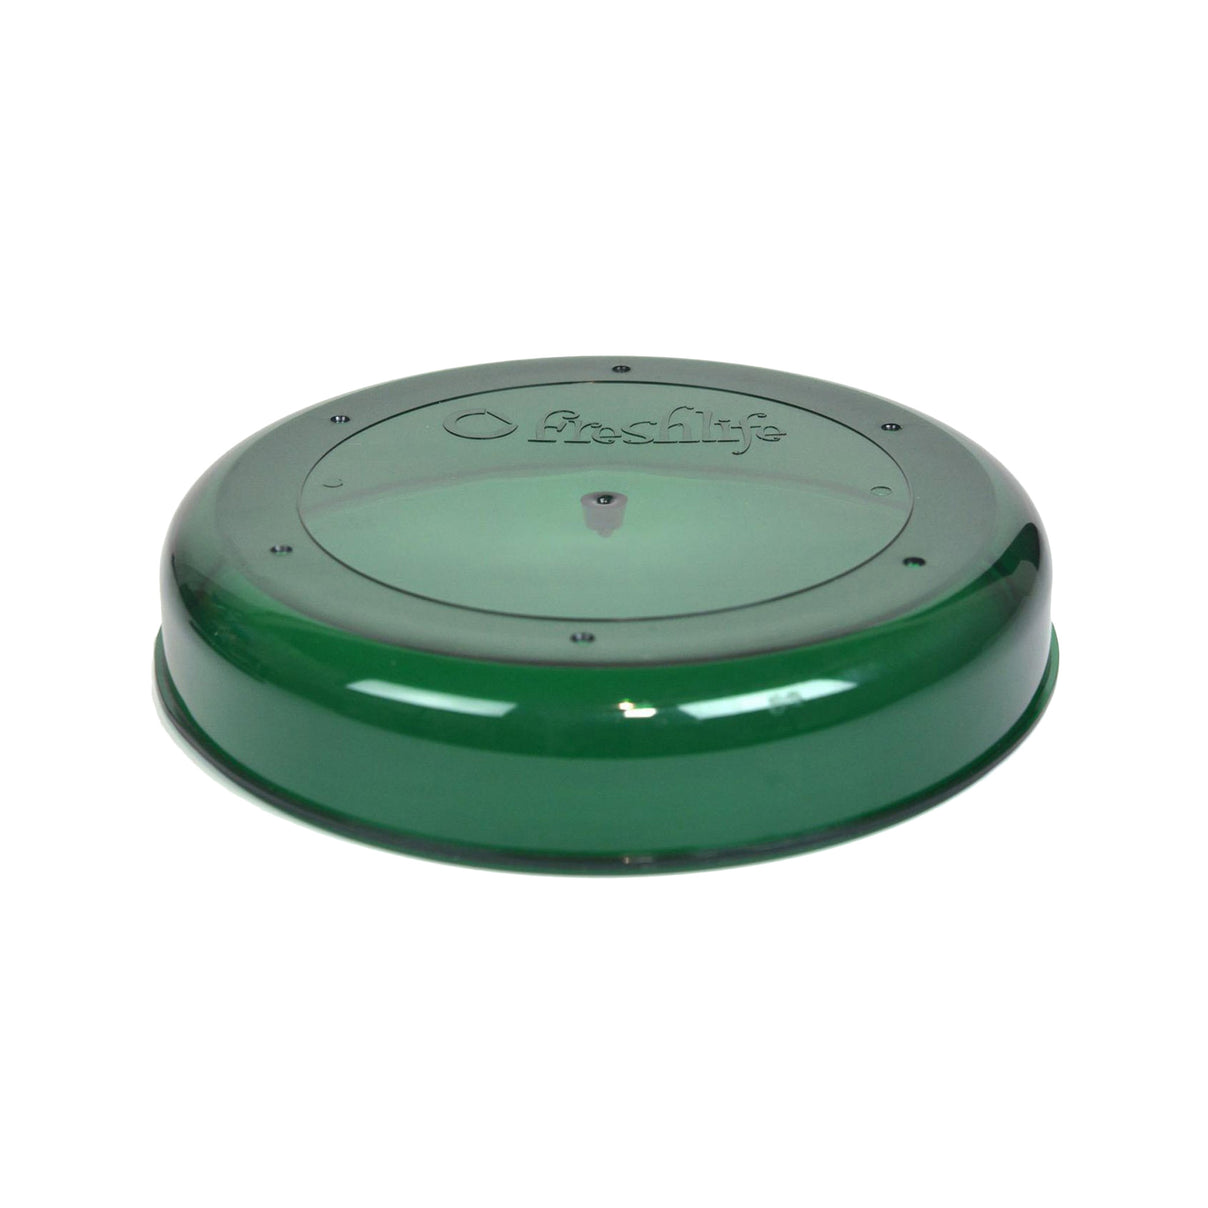 Green replacement top lid for the Freshlife® Automatic Sprouter, FL-3000. Can also fit the FL-2000 or FL-1000.